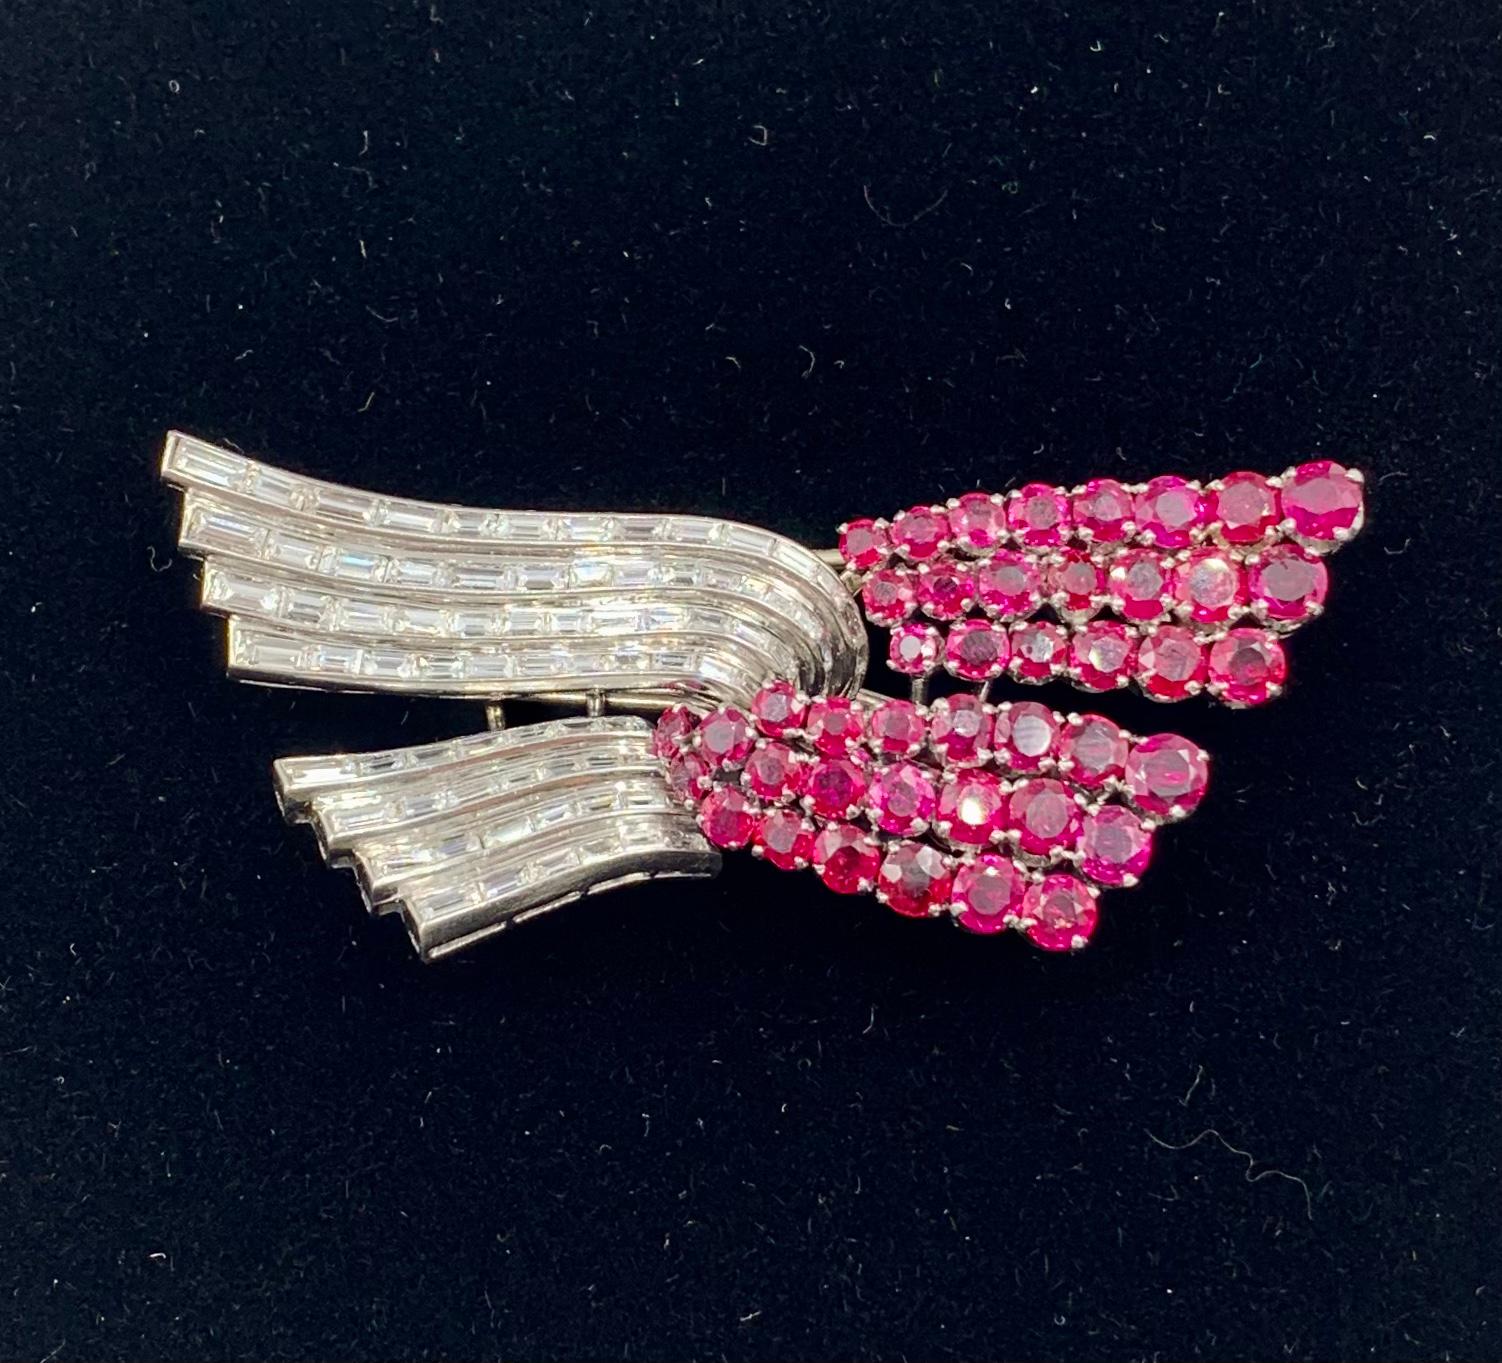 Drayson jewels seldom come onto the market, but when they do, discerning collectors take notice. The unusual, stylish design paired with exquisite workmanship make them highly desirable and recognizable. 

This fine transformable Art Deco wings